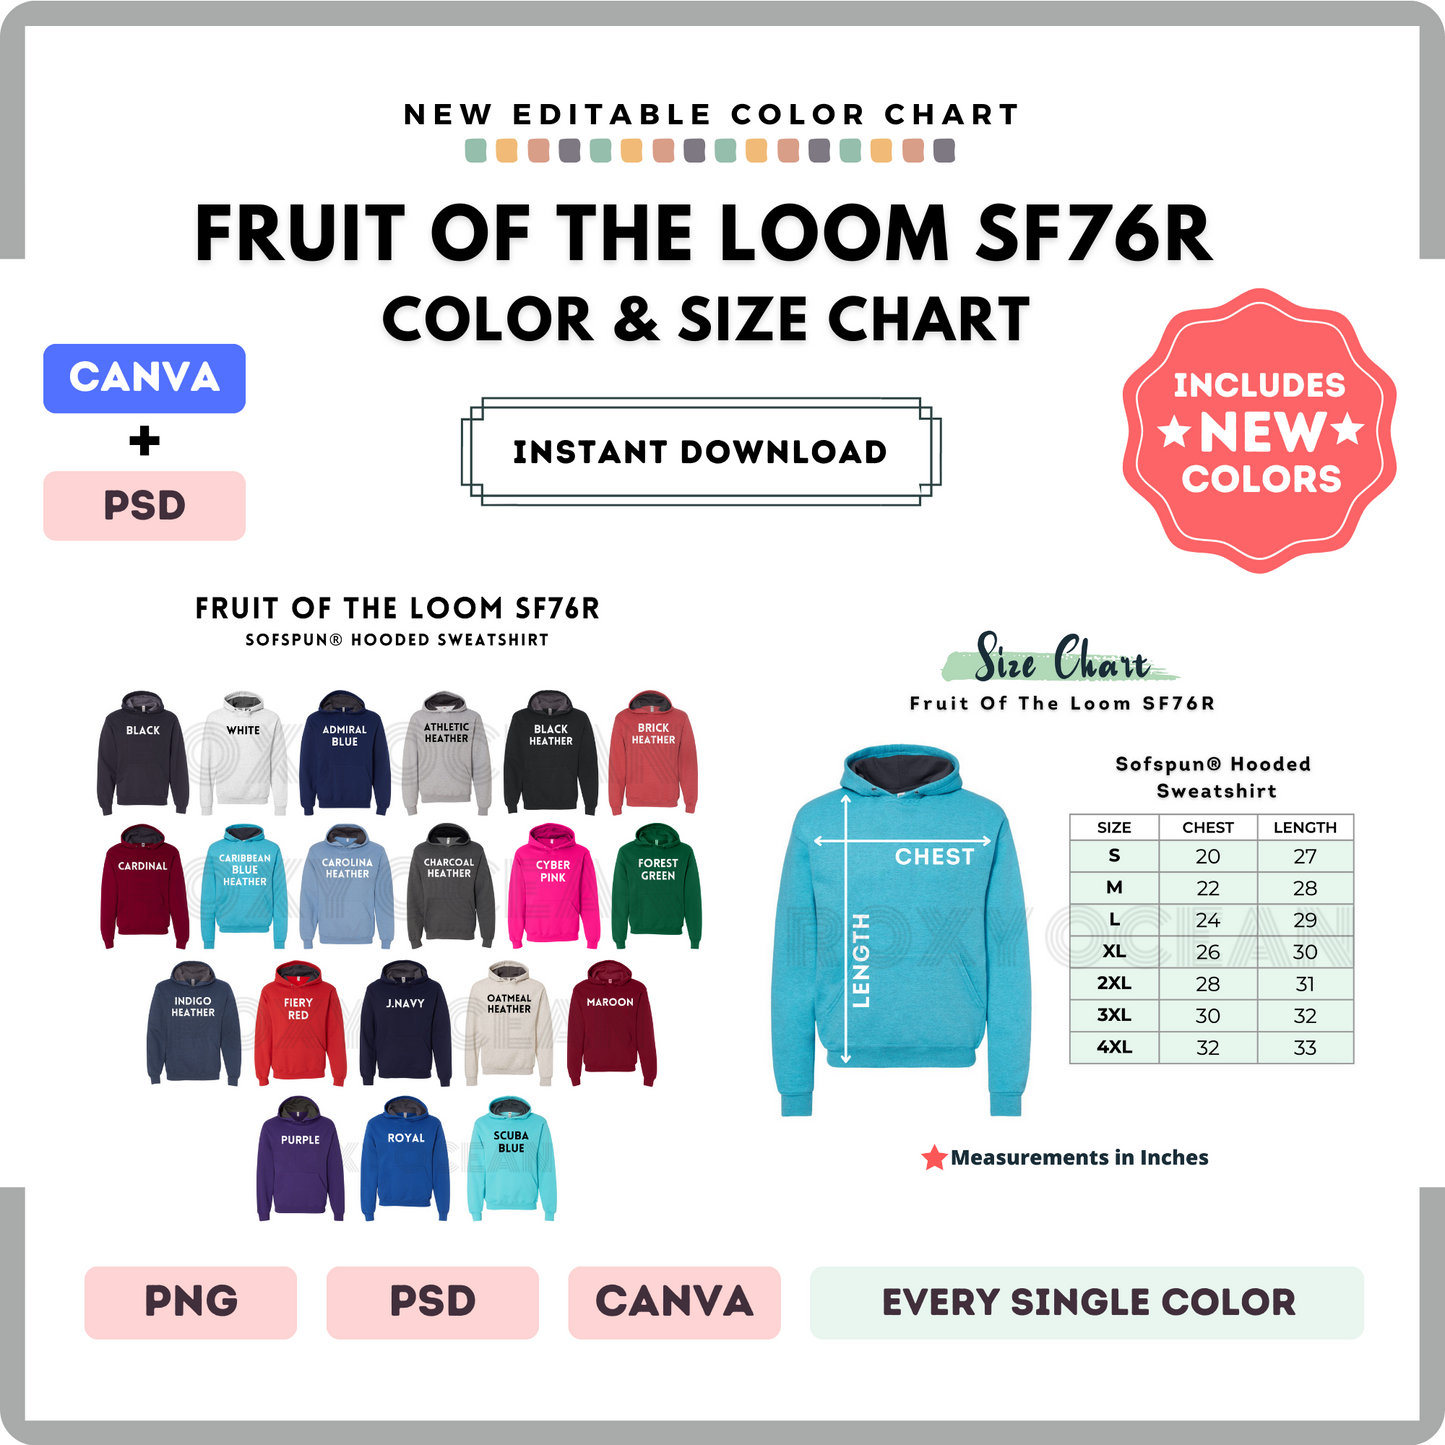 Fruit Of The Loom SF76R Color and Size Chart